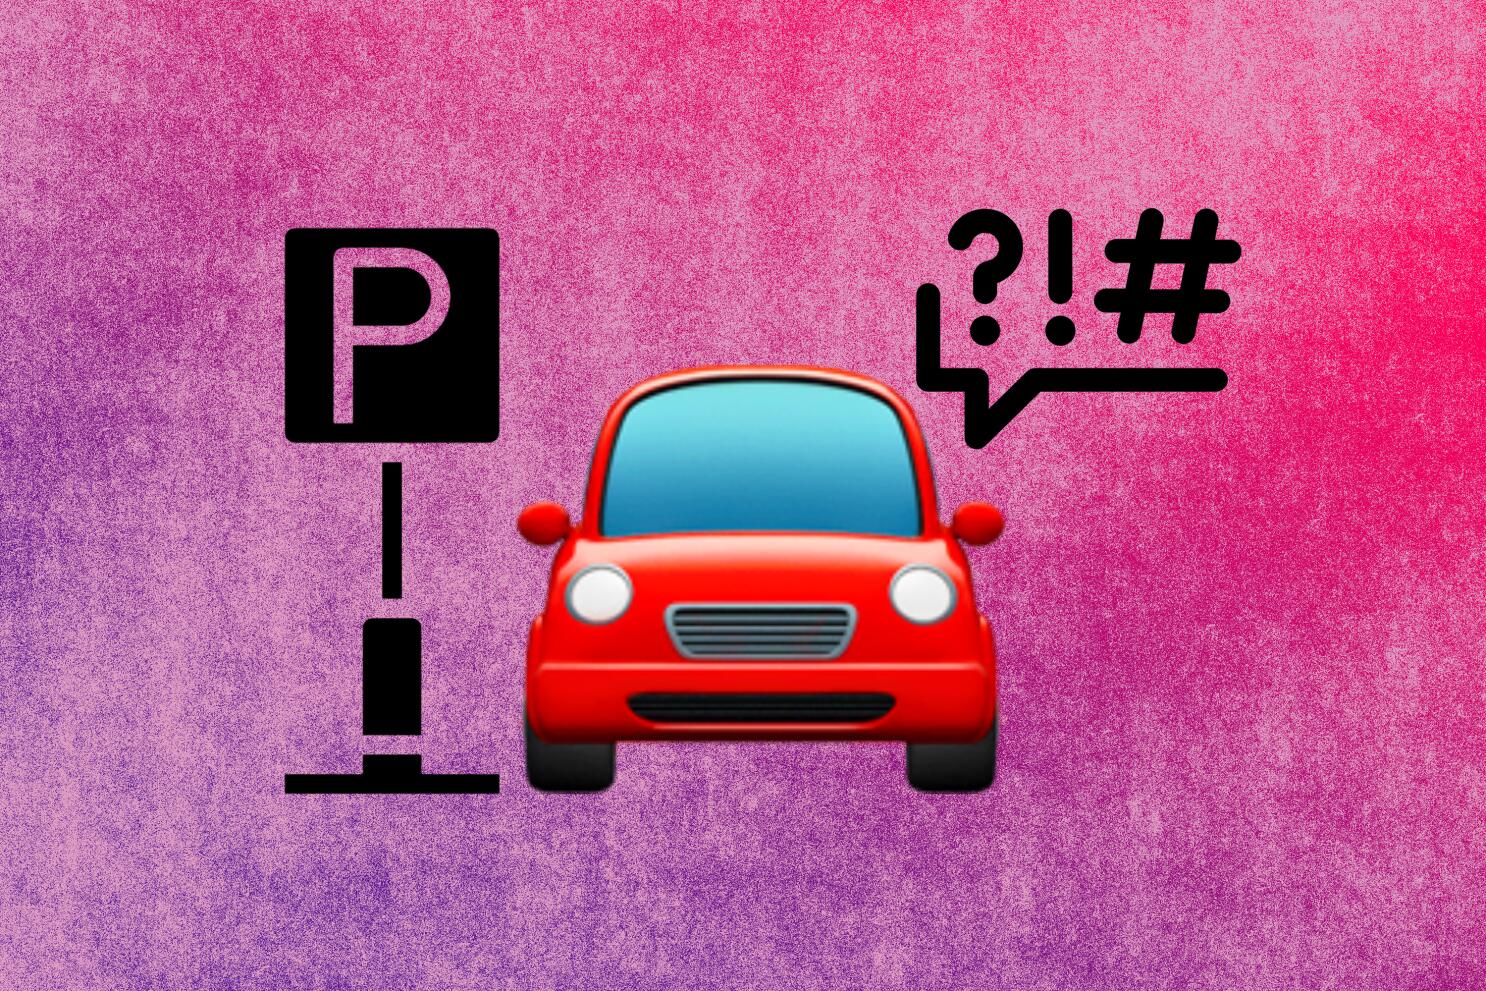 two cars p and house emoji